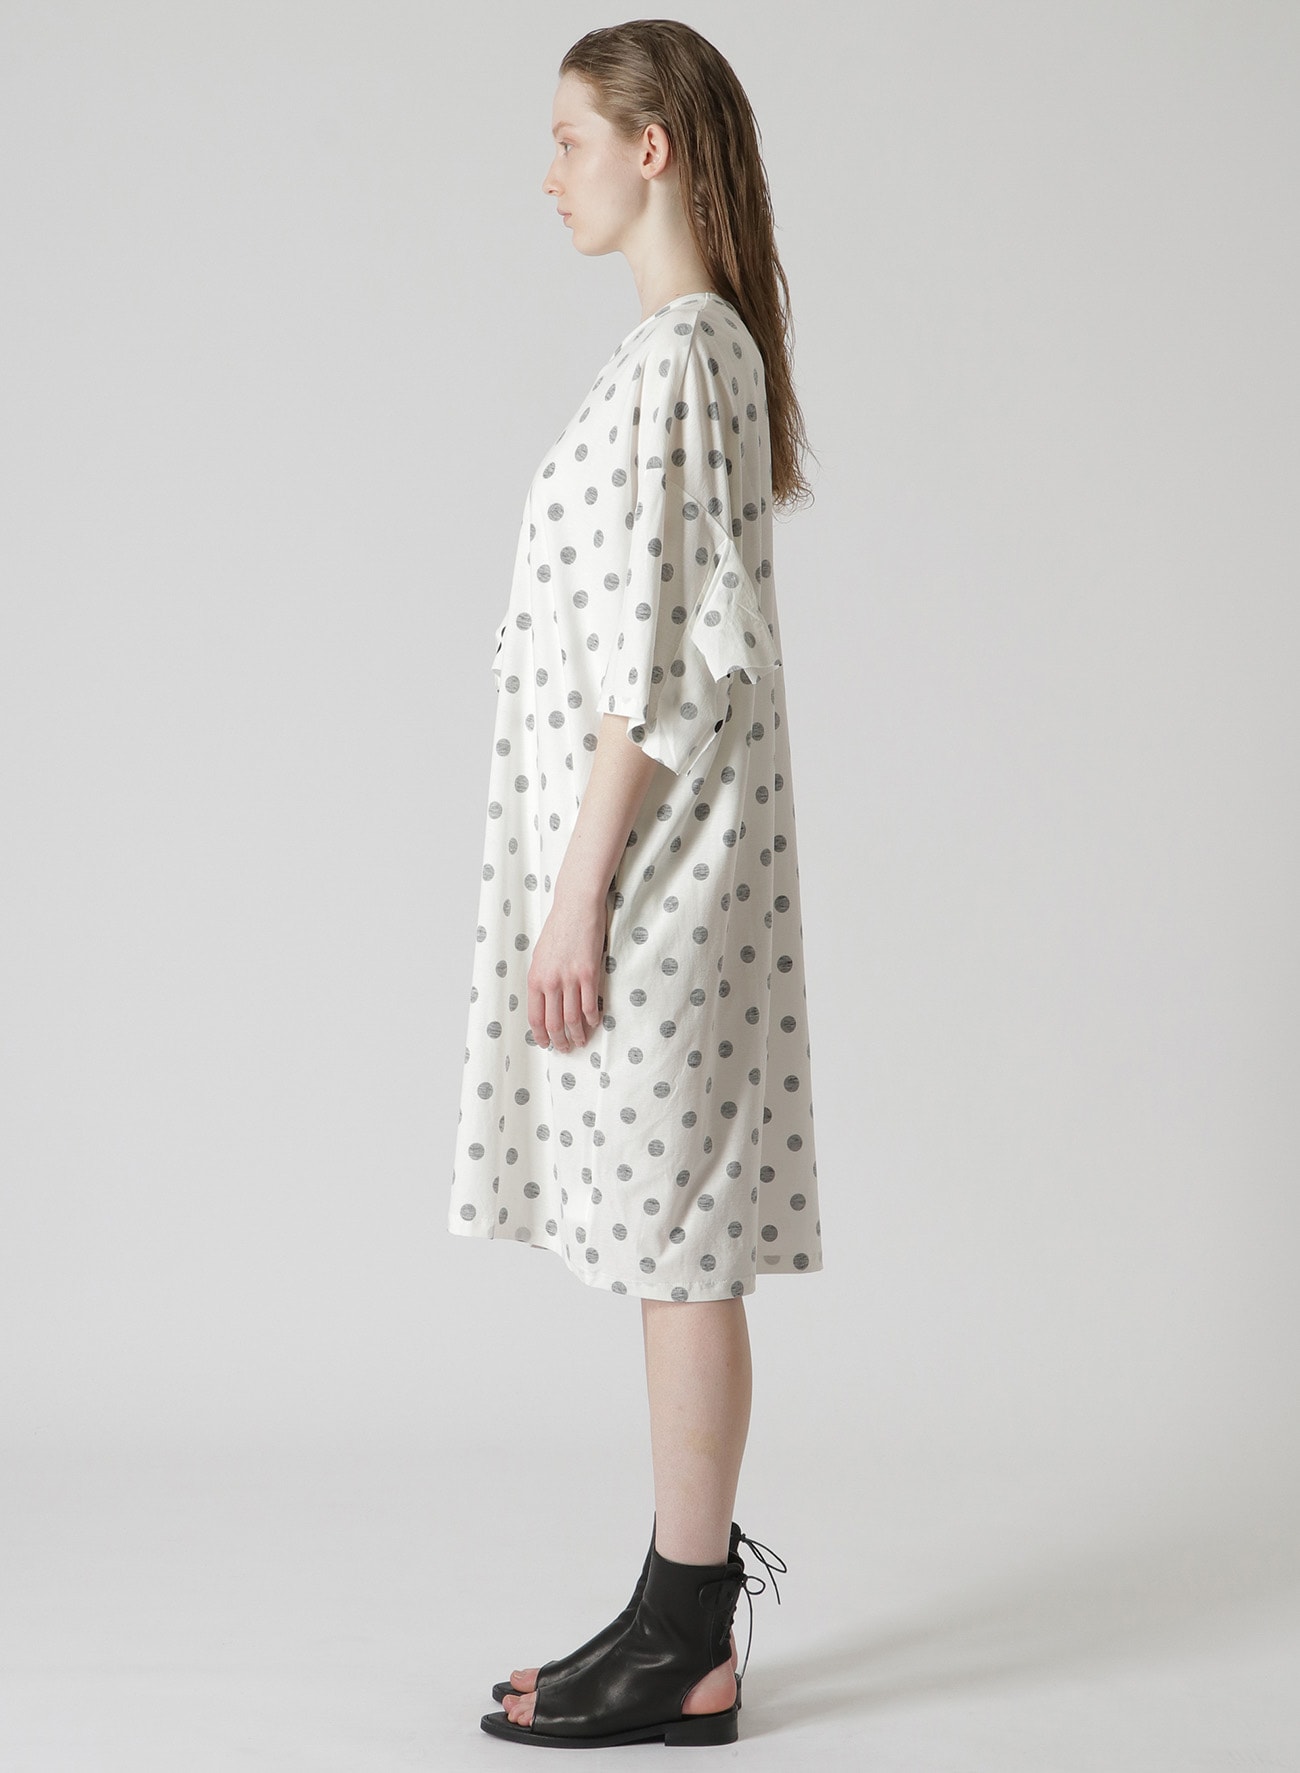 POLKA DOT PRINT DRESS WITH RIGHT CHEST POCKET